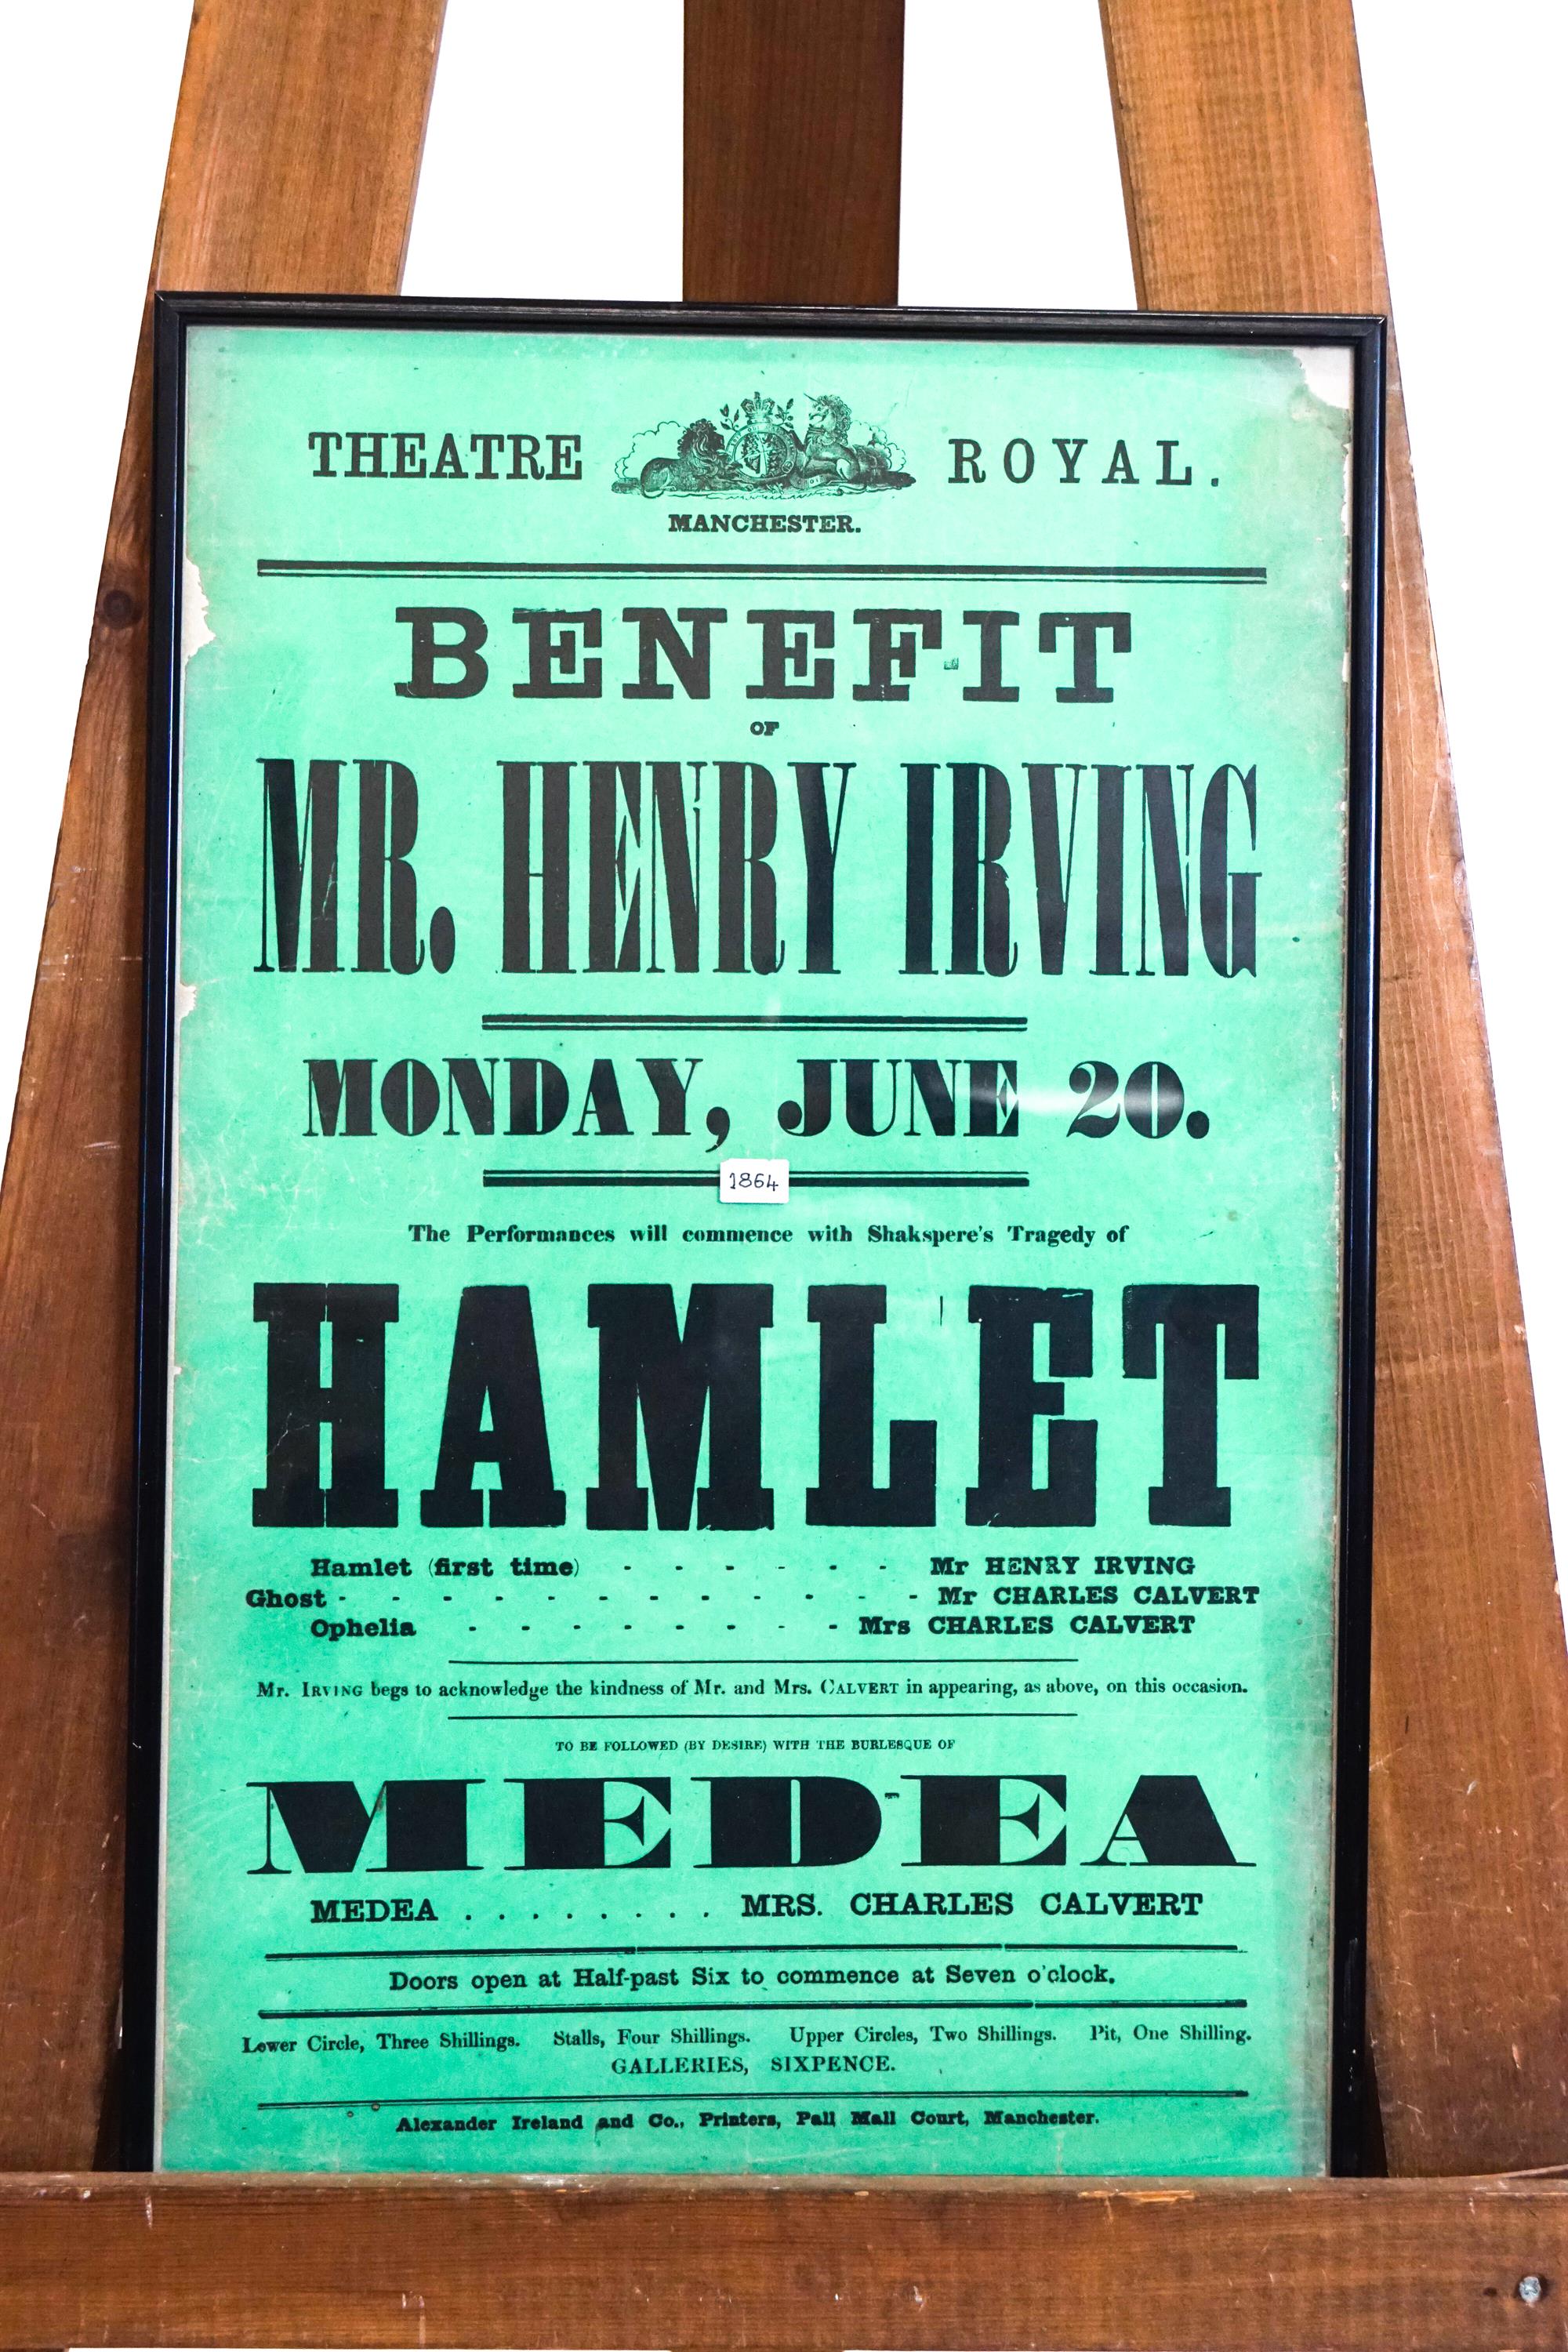 The Royal Theatre Manchester, a poster.